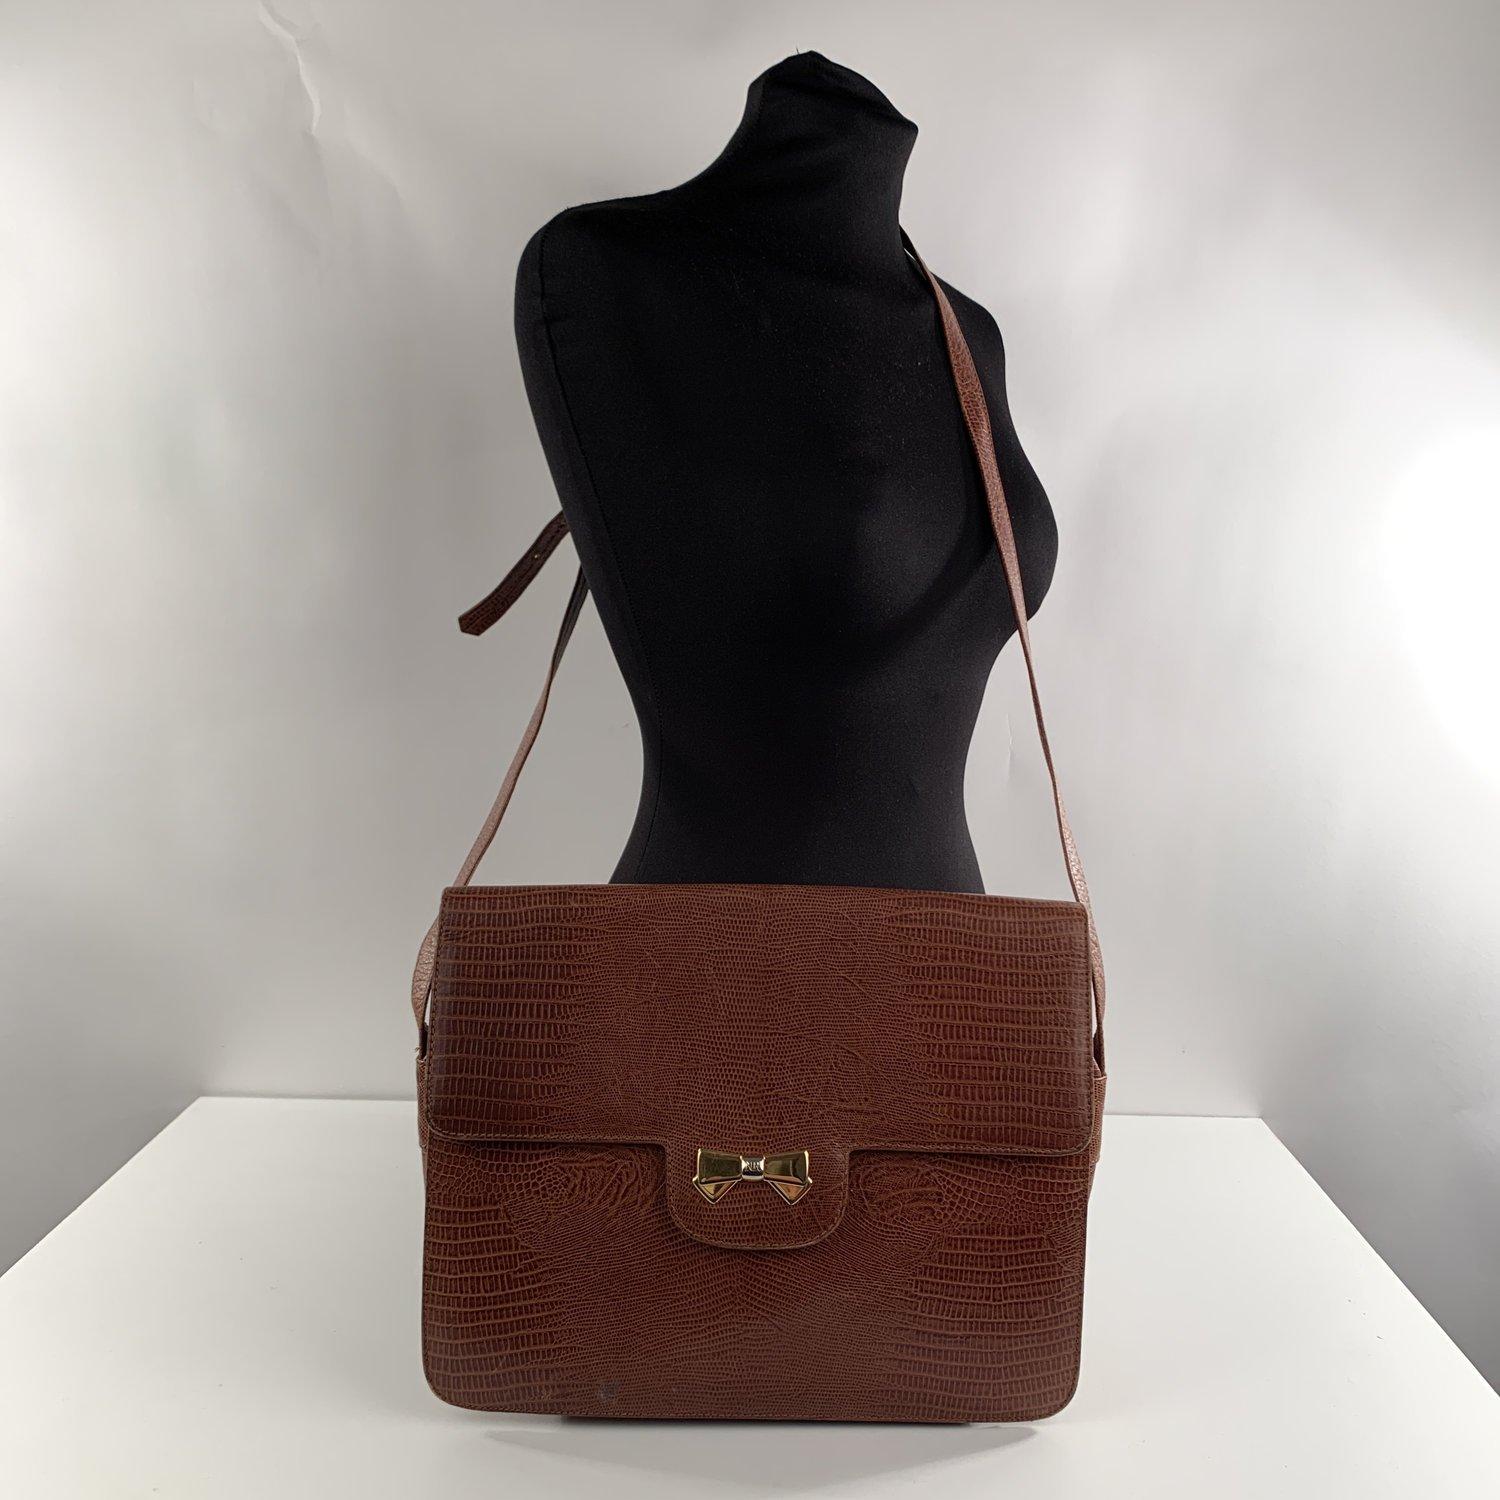 MATERIAL: Leather COLOR: Tan MODEL: Shoulder Bag GENDER: Women SIZE: Medium Condition B - VERY GOOD Gently used! Some darkness on leather due to normal use. The internal pocket has unstitched sides Measurements BAG HEIGHT: 9.5 inches - 24,2 cm BAG